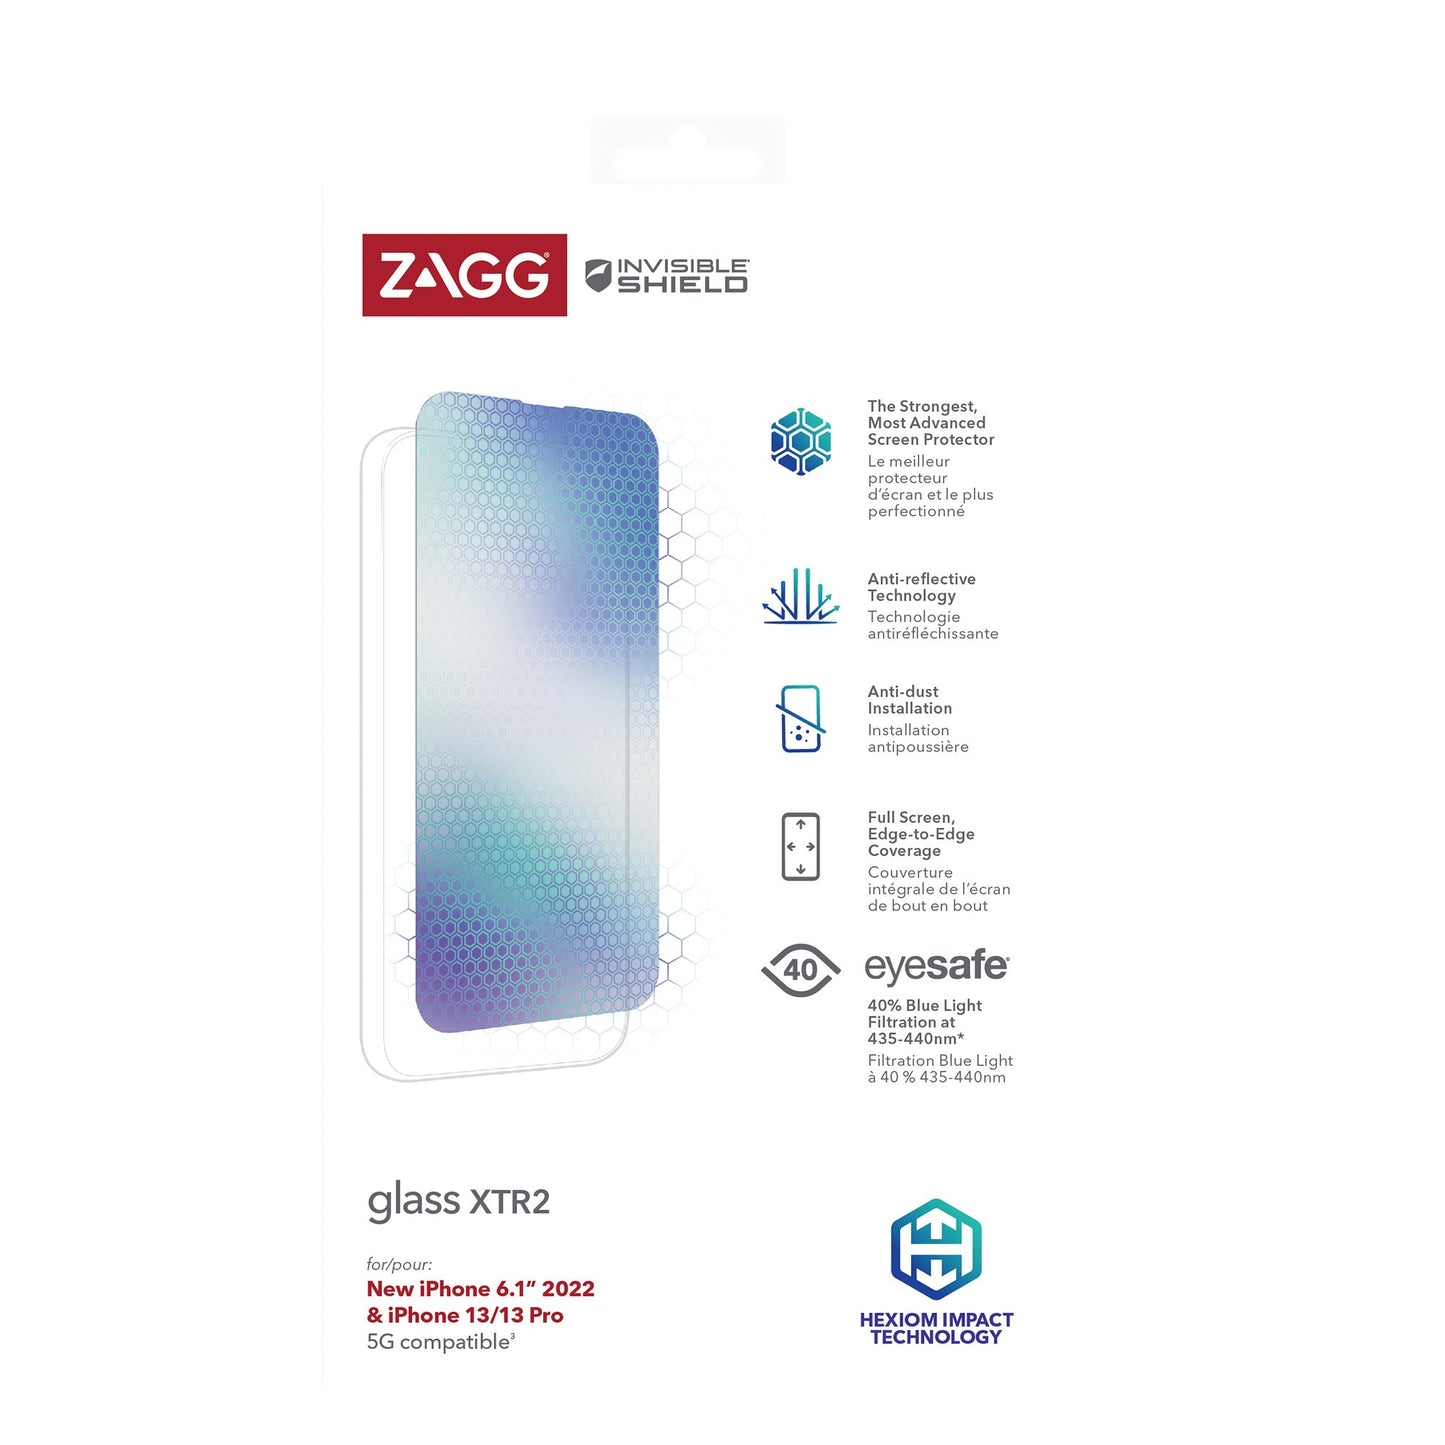 iPhone 14 Pro ZAGG InvisibleShield Glass XTR2 Screen Protector - 15-10500